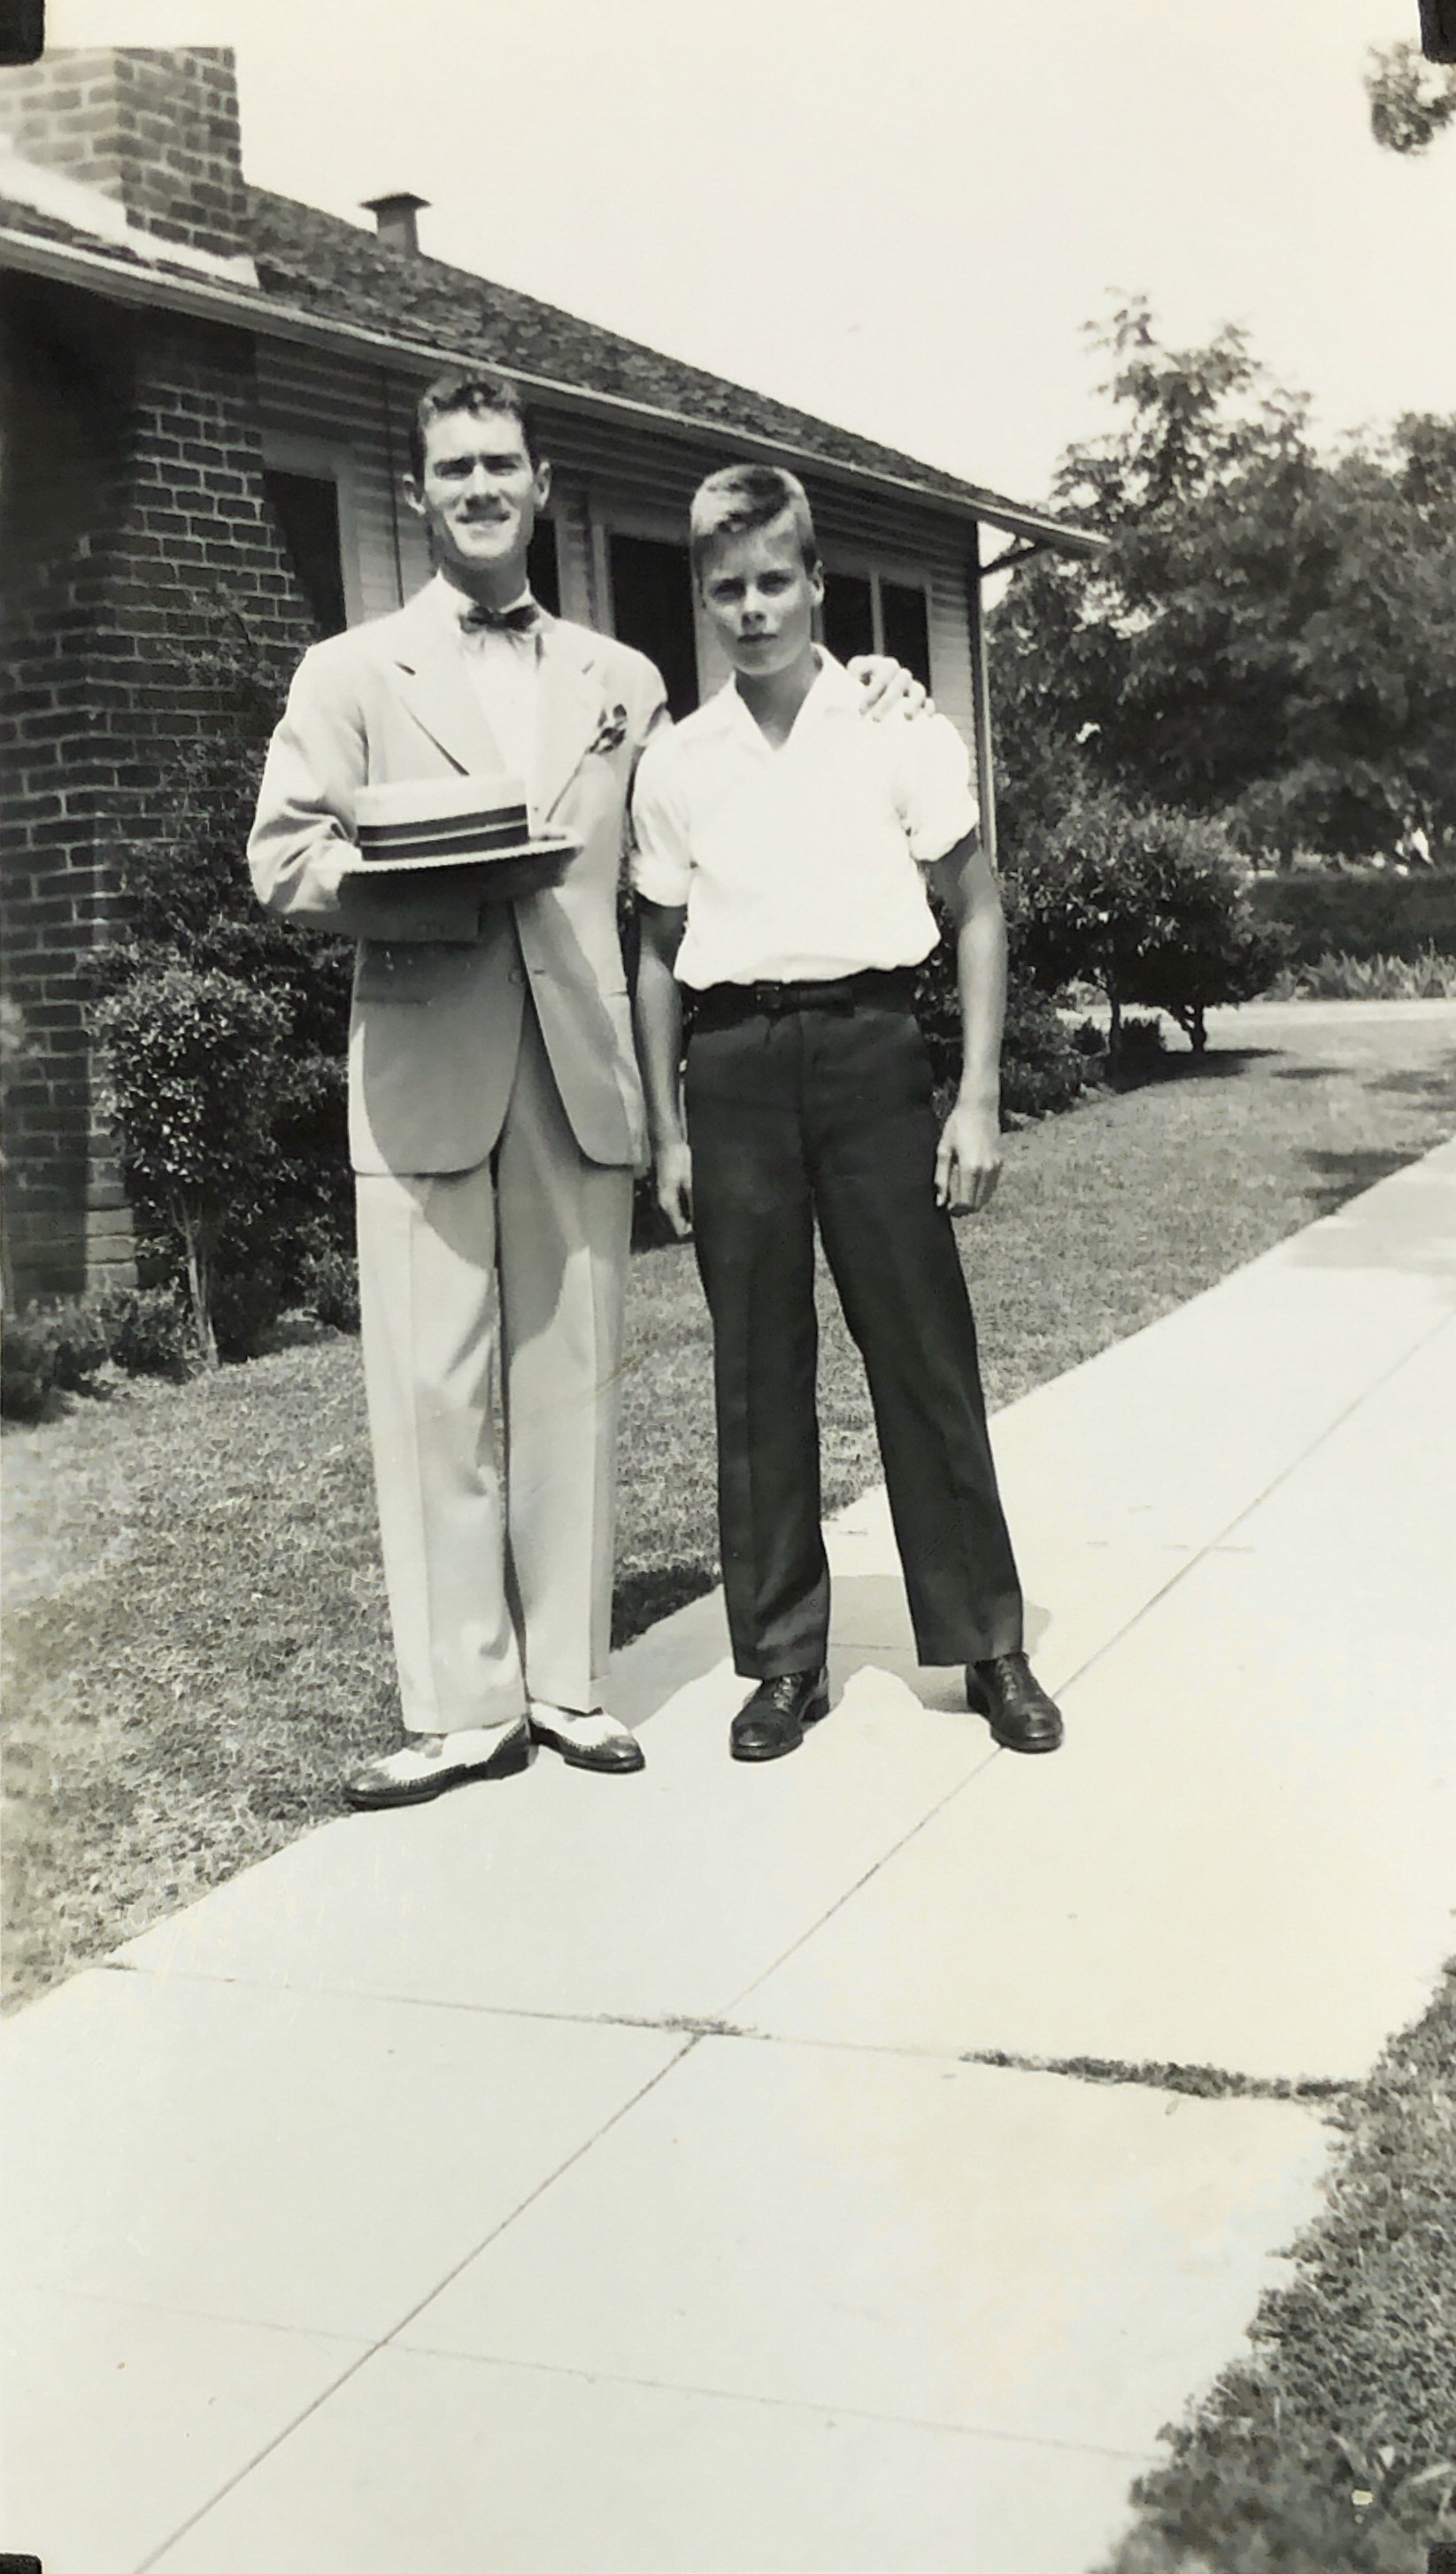  Bill Francis and Bob Francis, c. 1943  Bob appears to be about 12 or 13. Perhaps taken around the time of Bill’s marriage to Betty Jeans Gross. Location: The Del Mar Blvd. side of the house at 212 S. Grand Oaks Ave. in Pasadena. The Robins Family Co